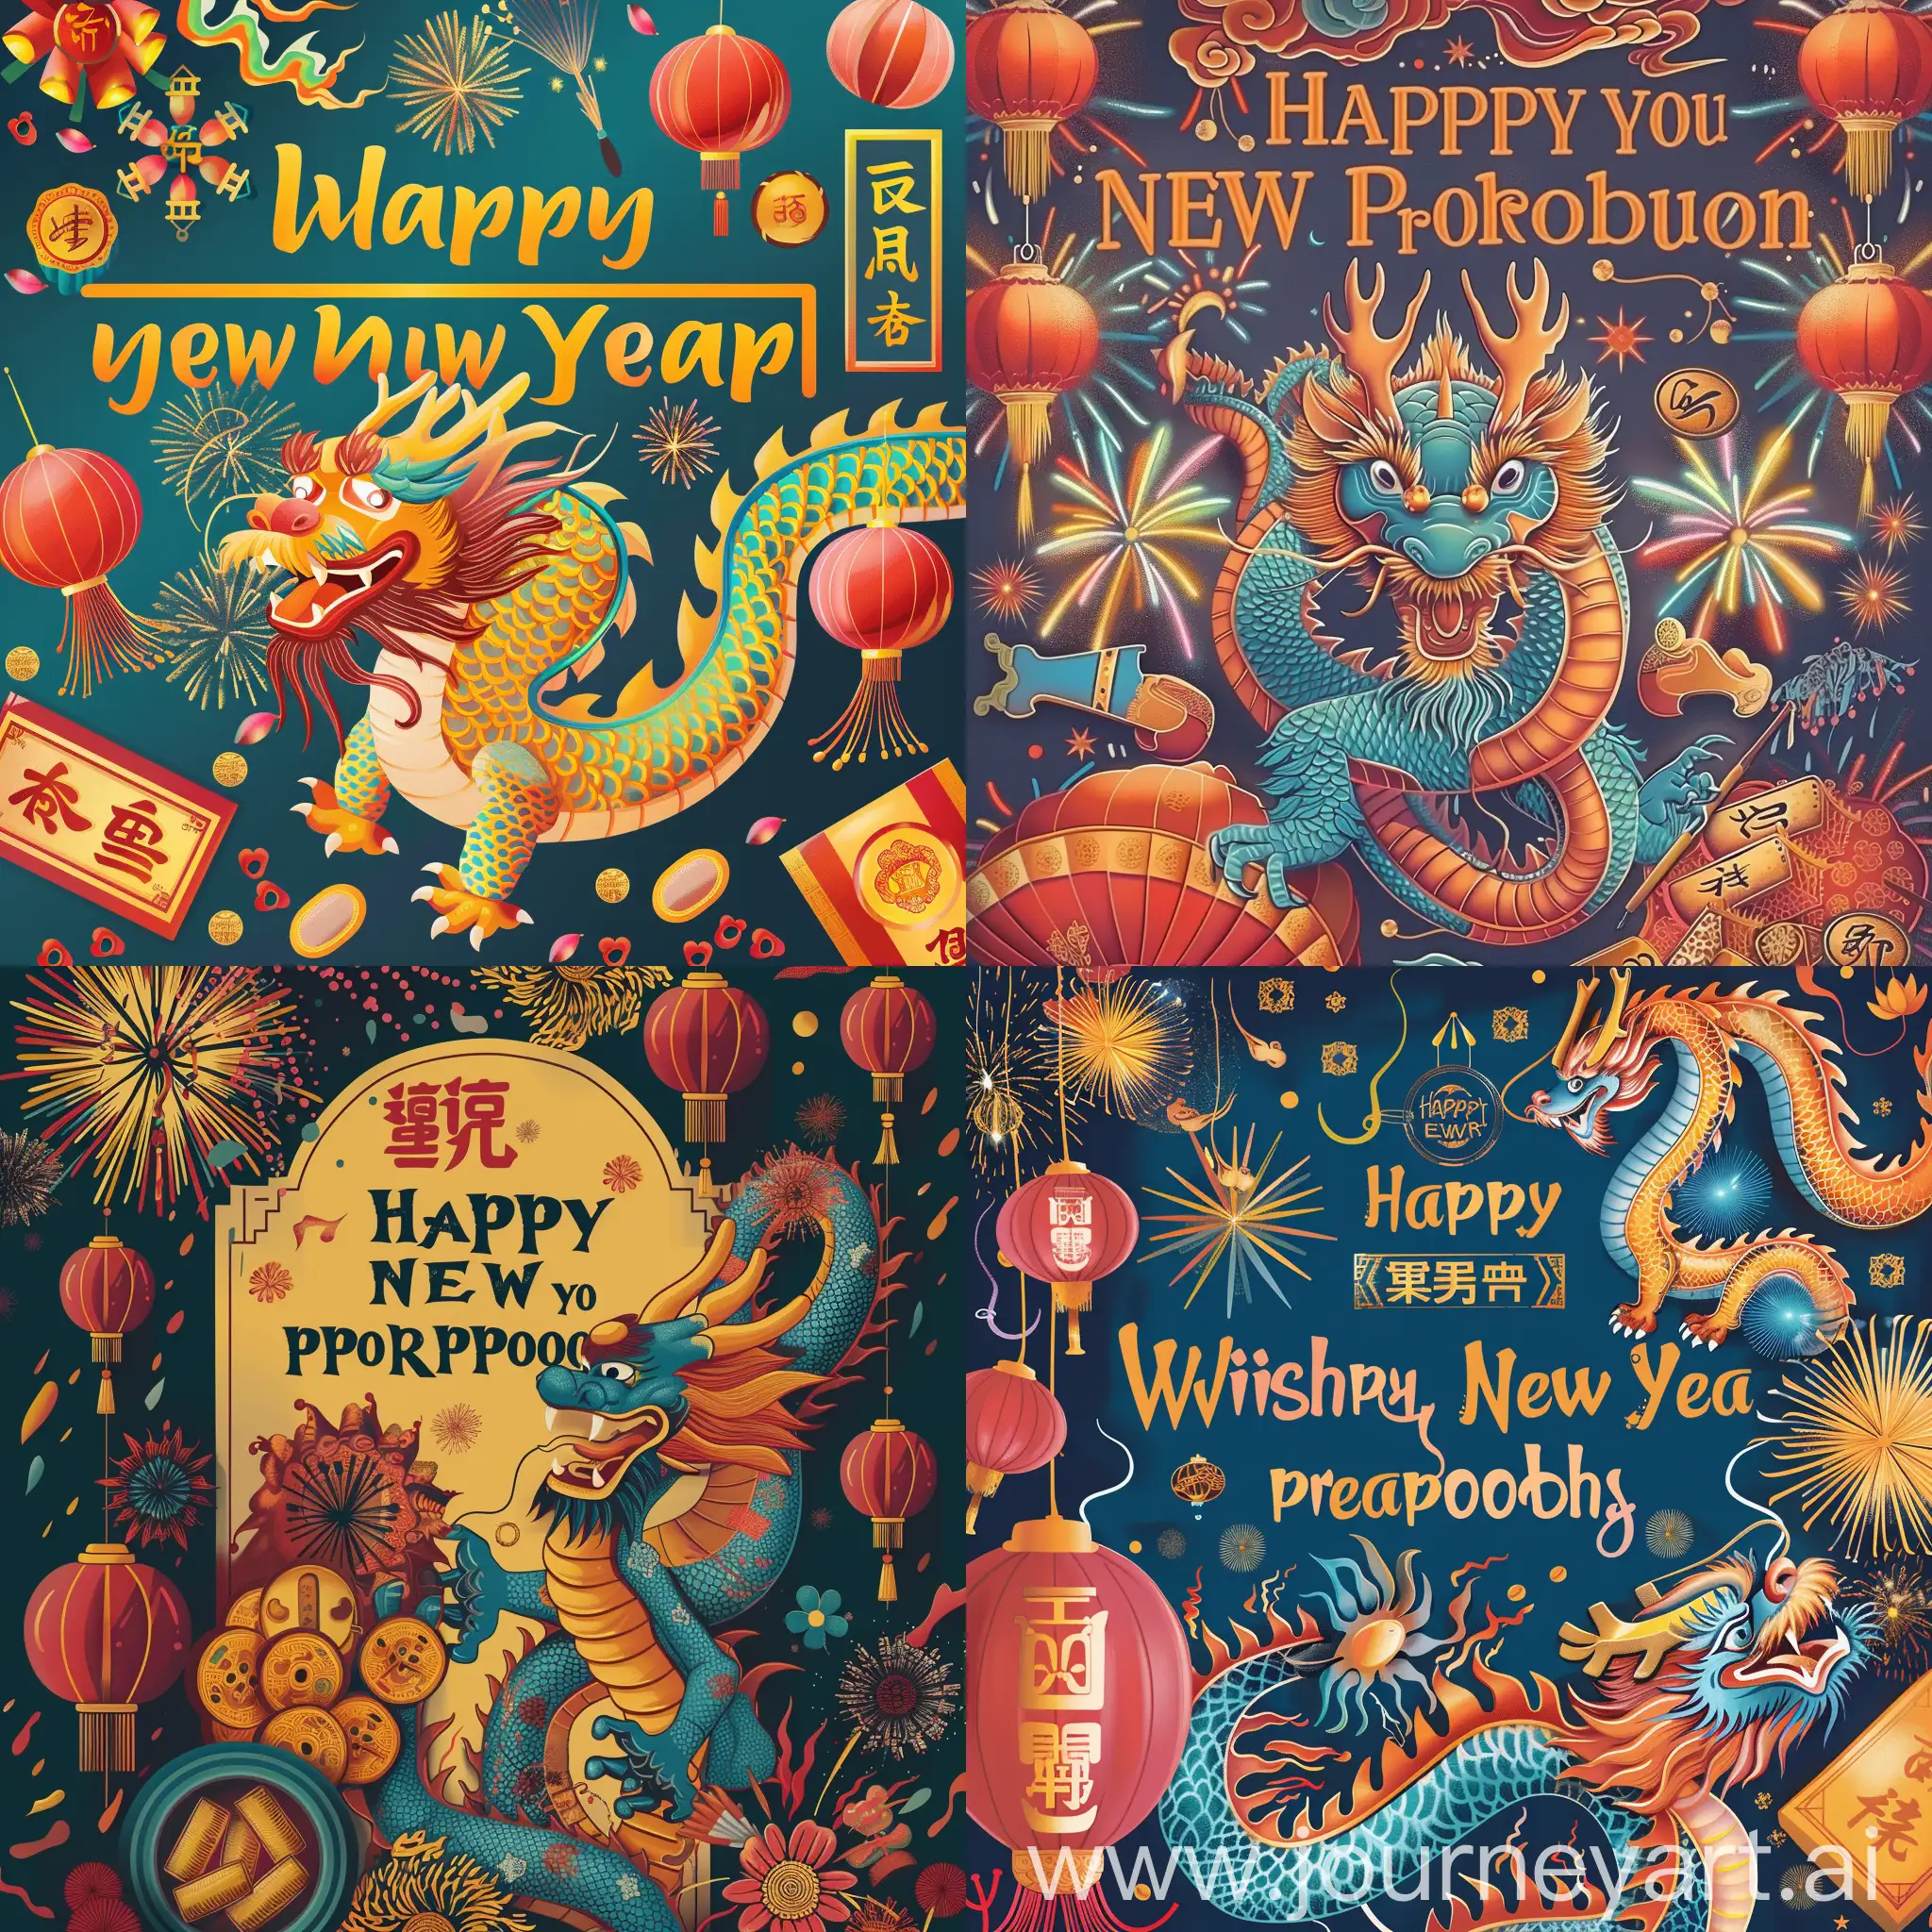 Vibrant-Spring-Festival-Poster-Dragon-Lanterns-and-Prosperity-Wishes